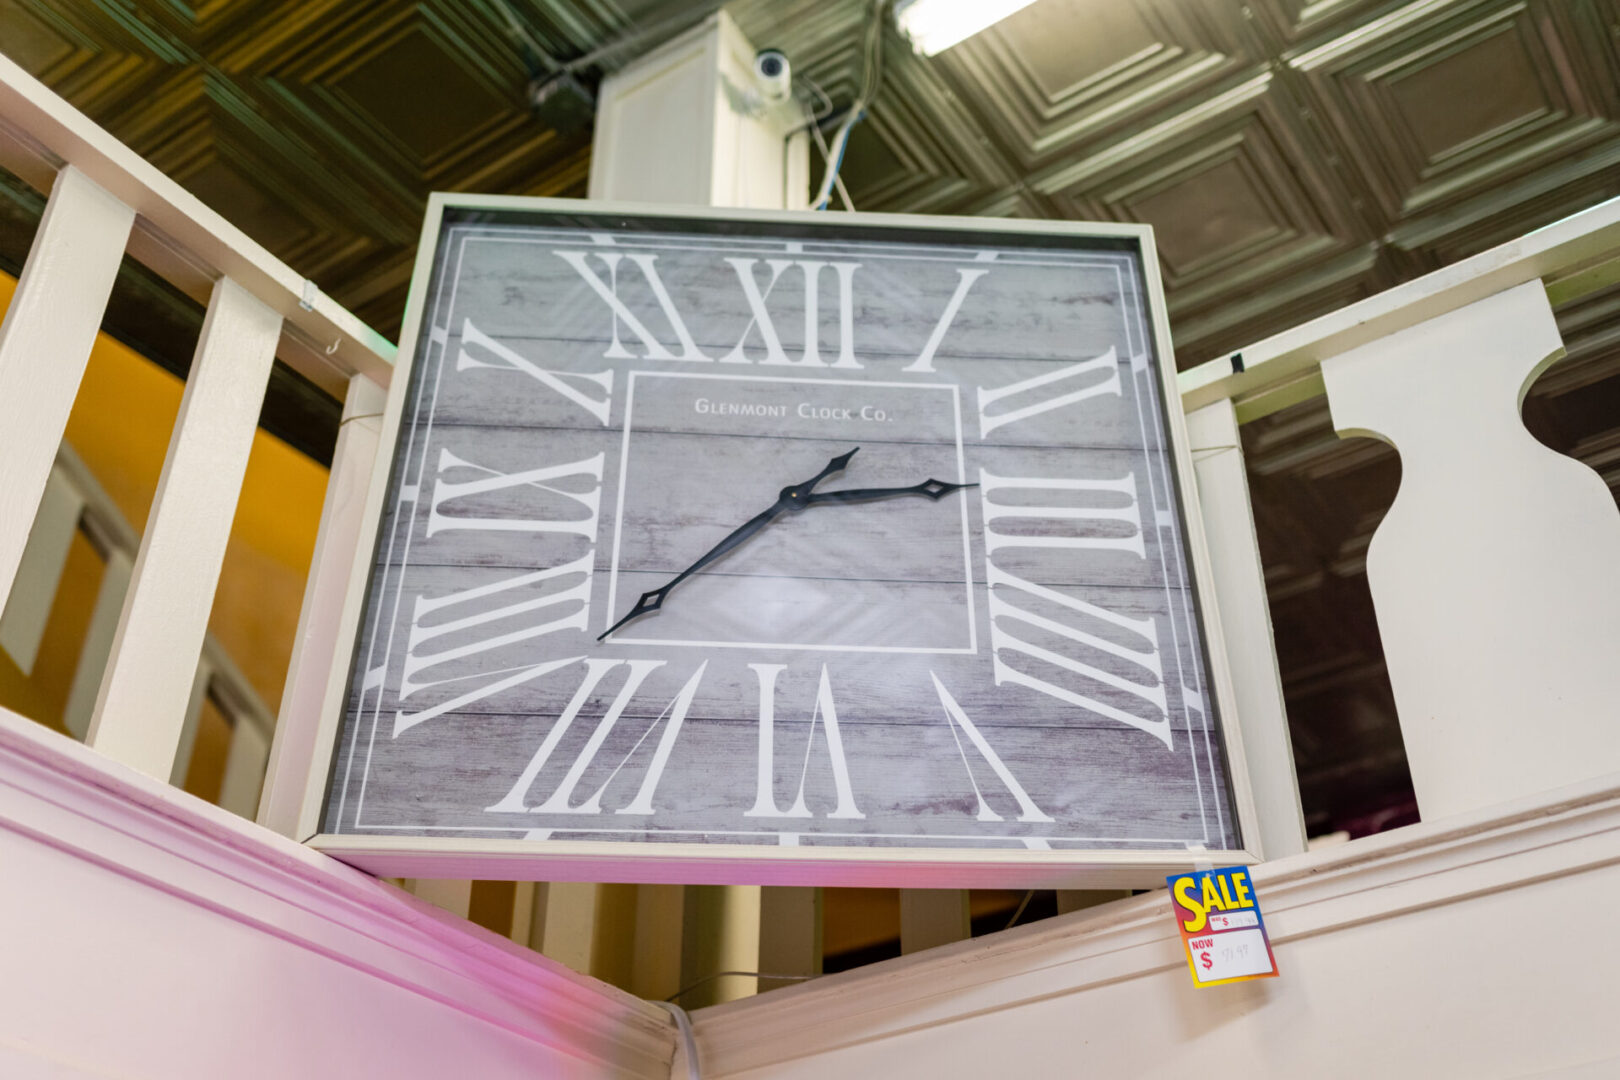 A large clock hanging from the ceiling of a store.